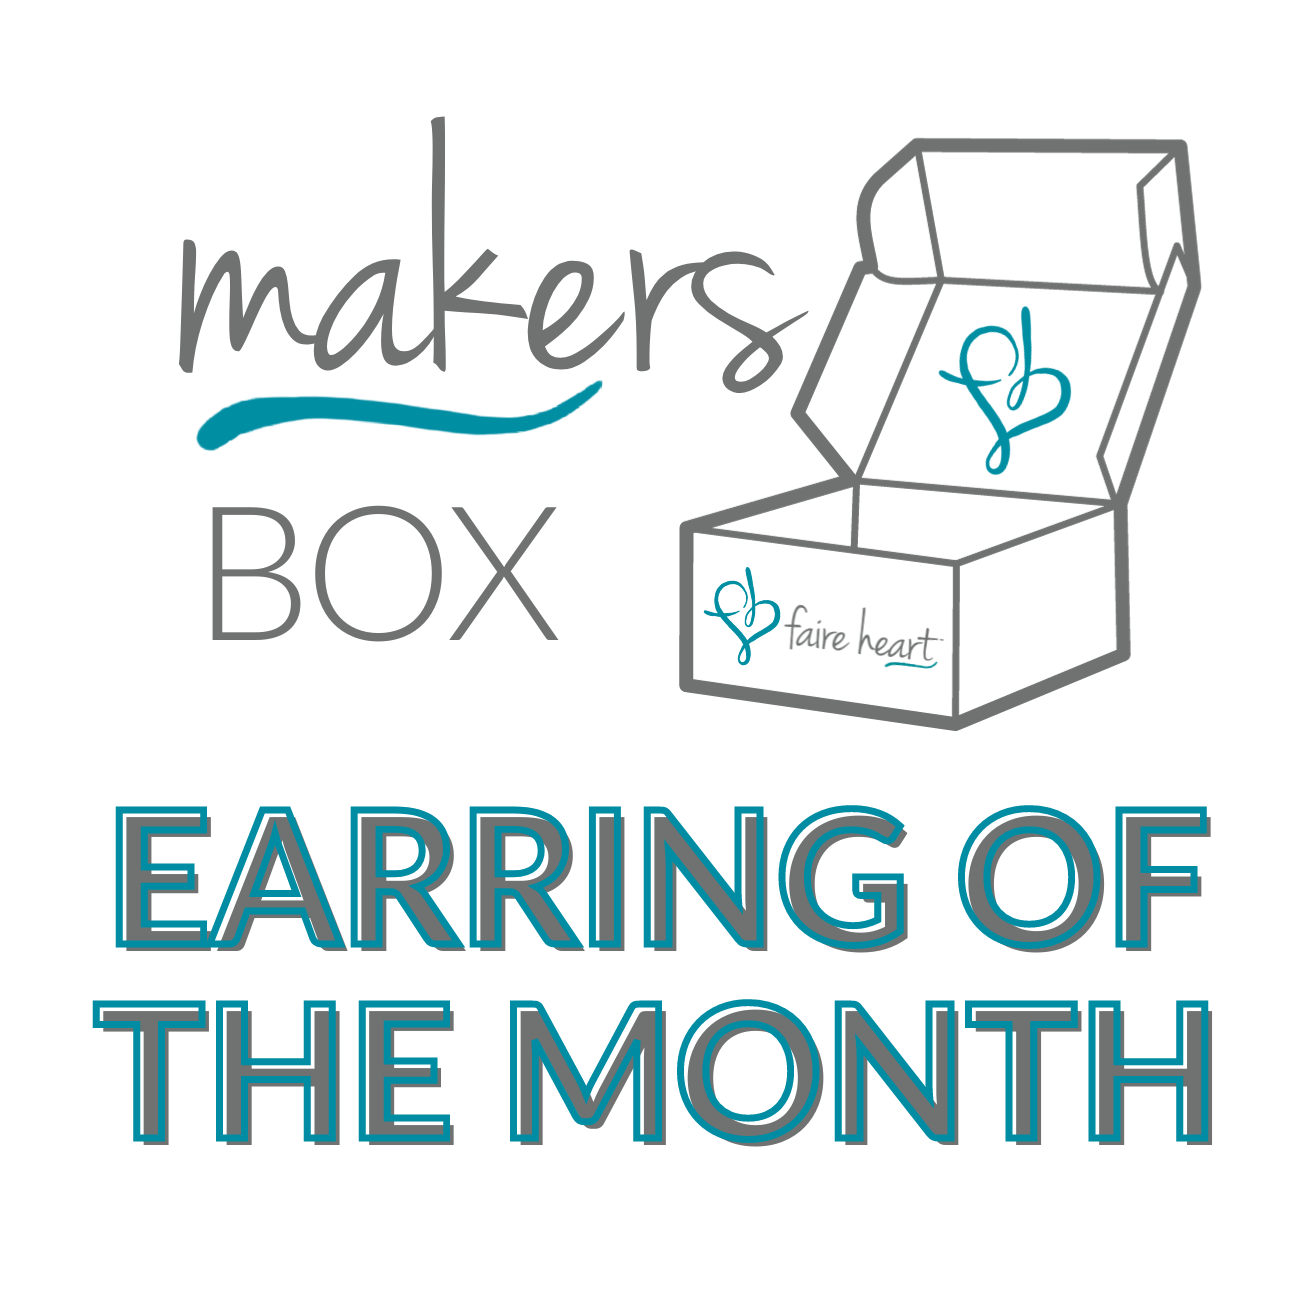 Makers EARRING of the Month Subscription - August